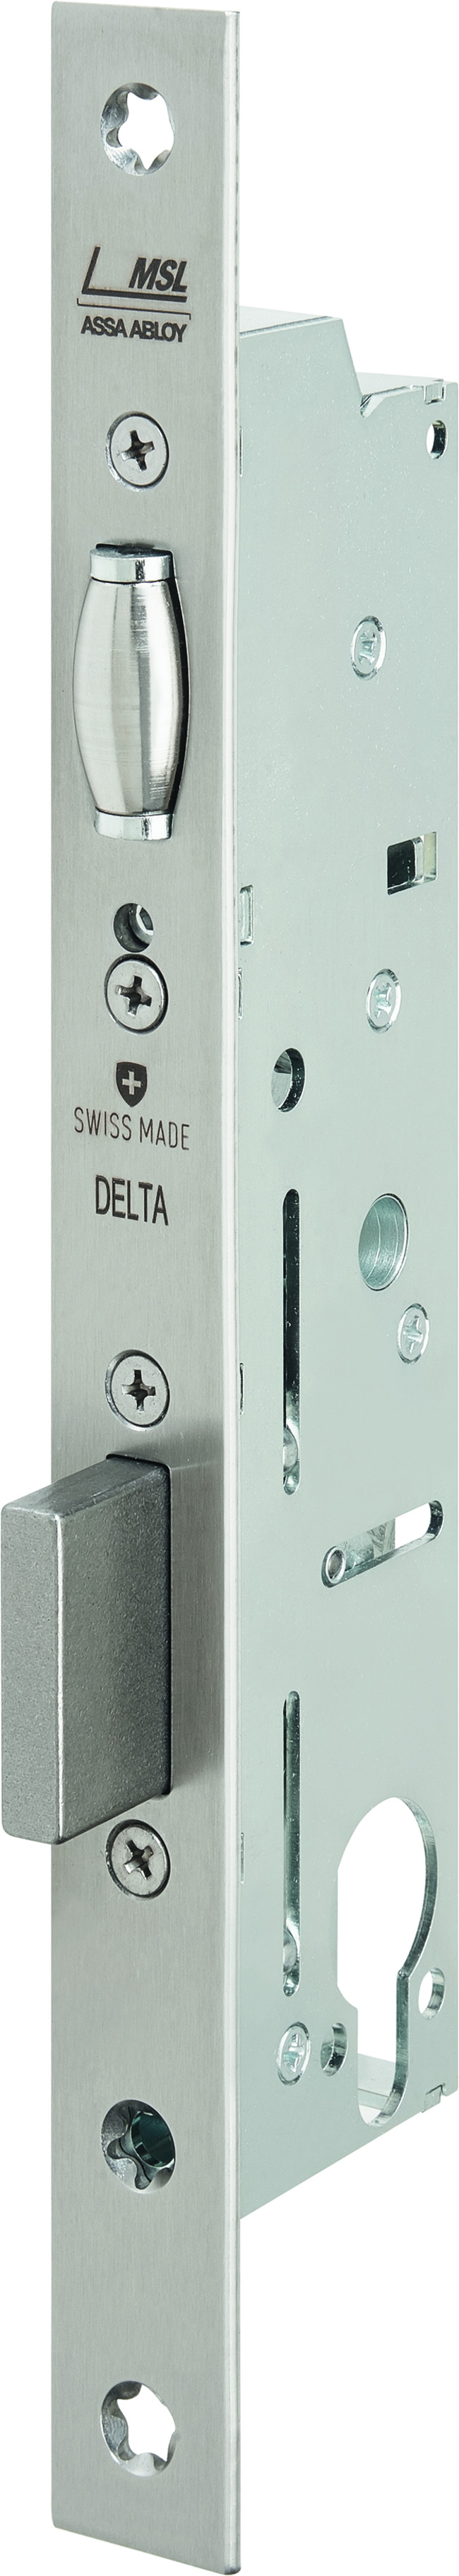 Delta security mortise lock 19424